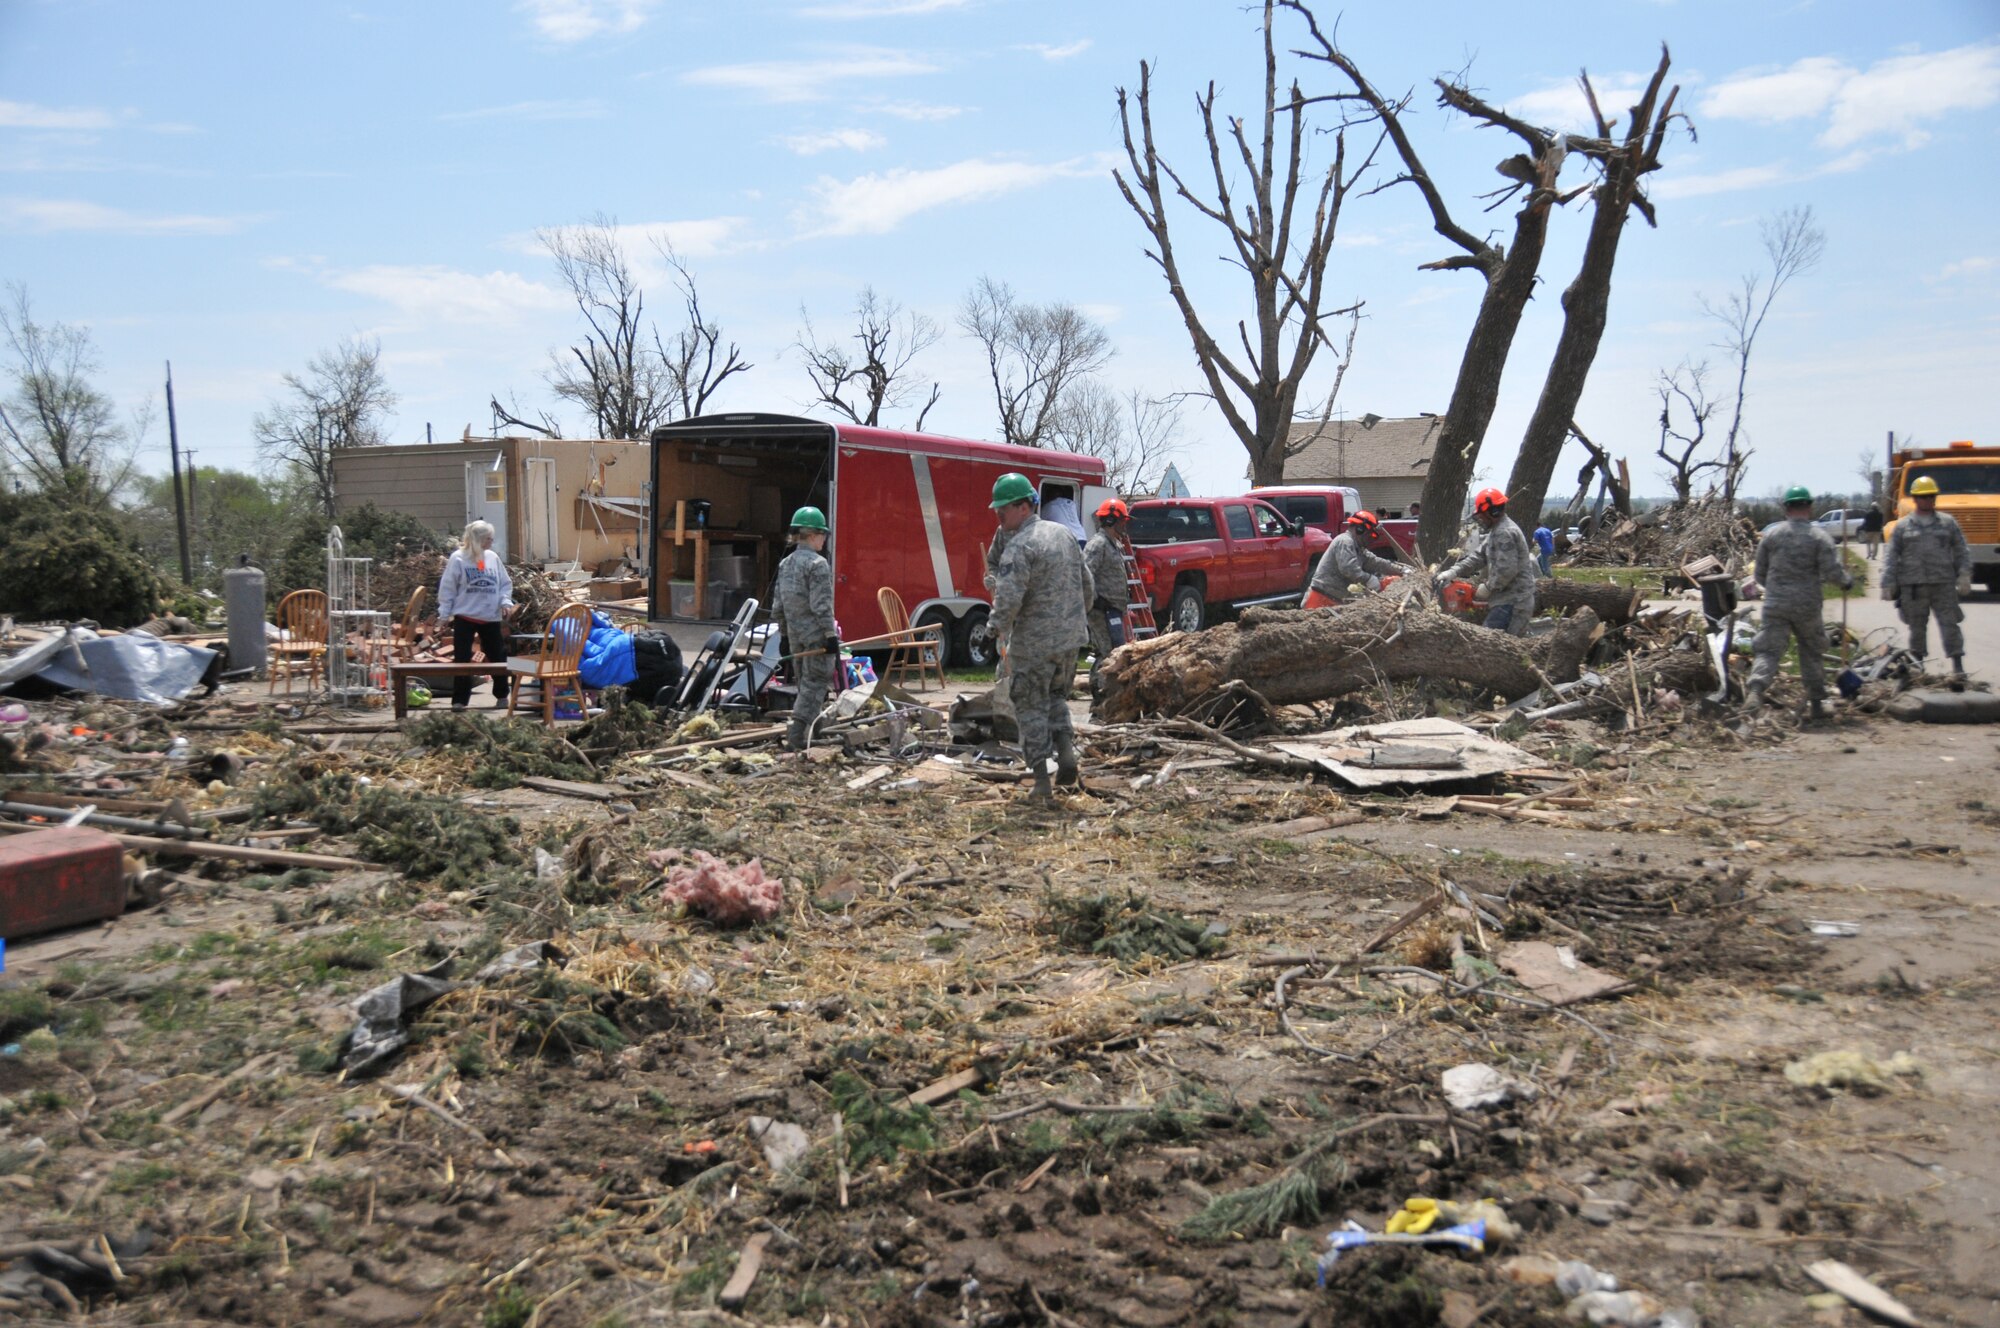 DELMONT, S.D. - Members of the 114th Civil Engineer Squadron of the South Dakota Air National Guard work alongside Delmont residents to assist with tornado recovery efforts after the city was hit by an F2 tornado on May 11, 2015.  Twenty-five members of the unit, as well as heavy equipment,  were activated for a period of up to five days to assist with the removal of large debris in the area.(National Guard photo by Senior Master Sgt. Nancy Ausland/released)